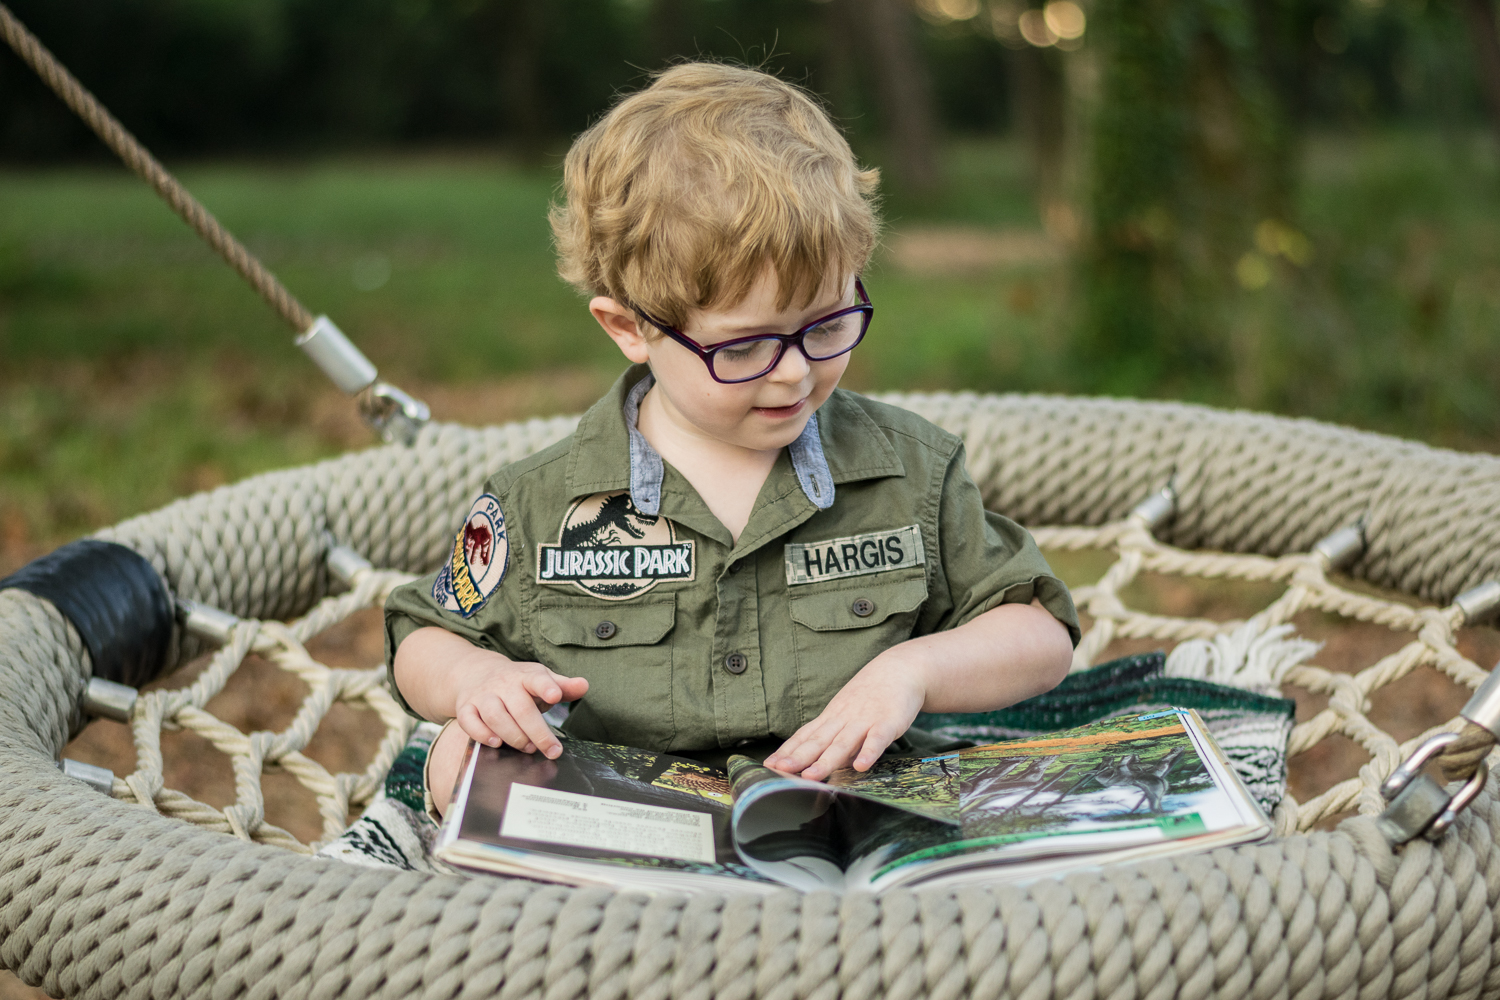 Young boy reading a dinosaur book in a large mesh swing.